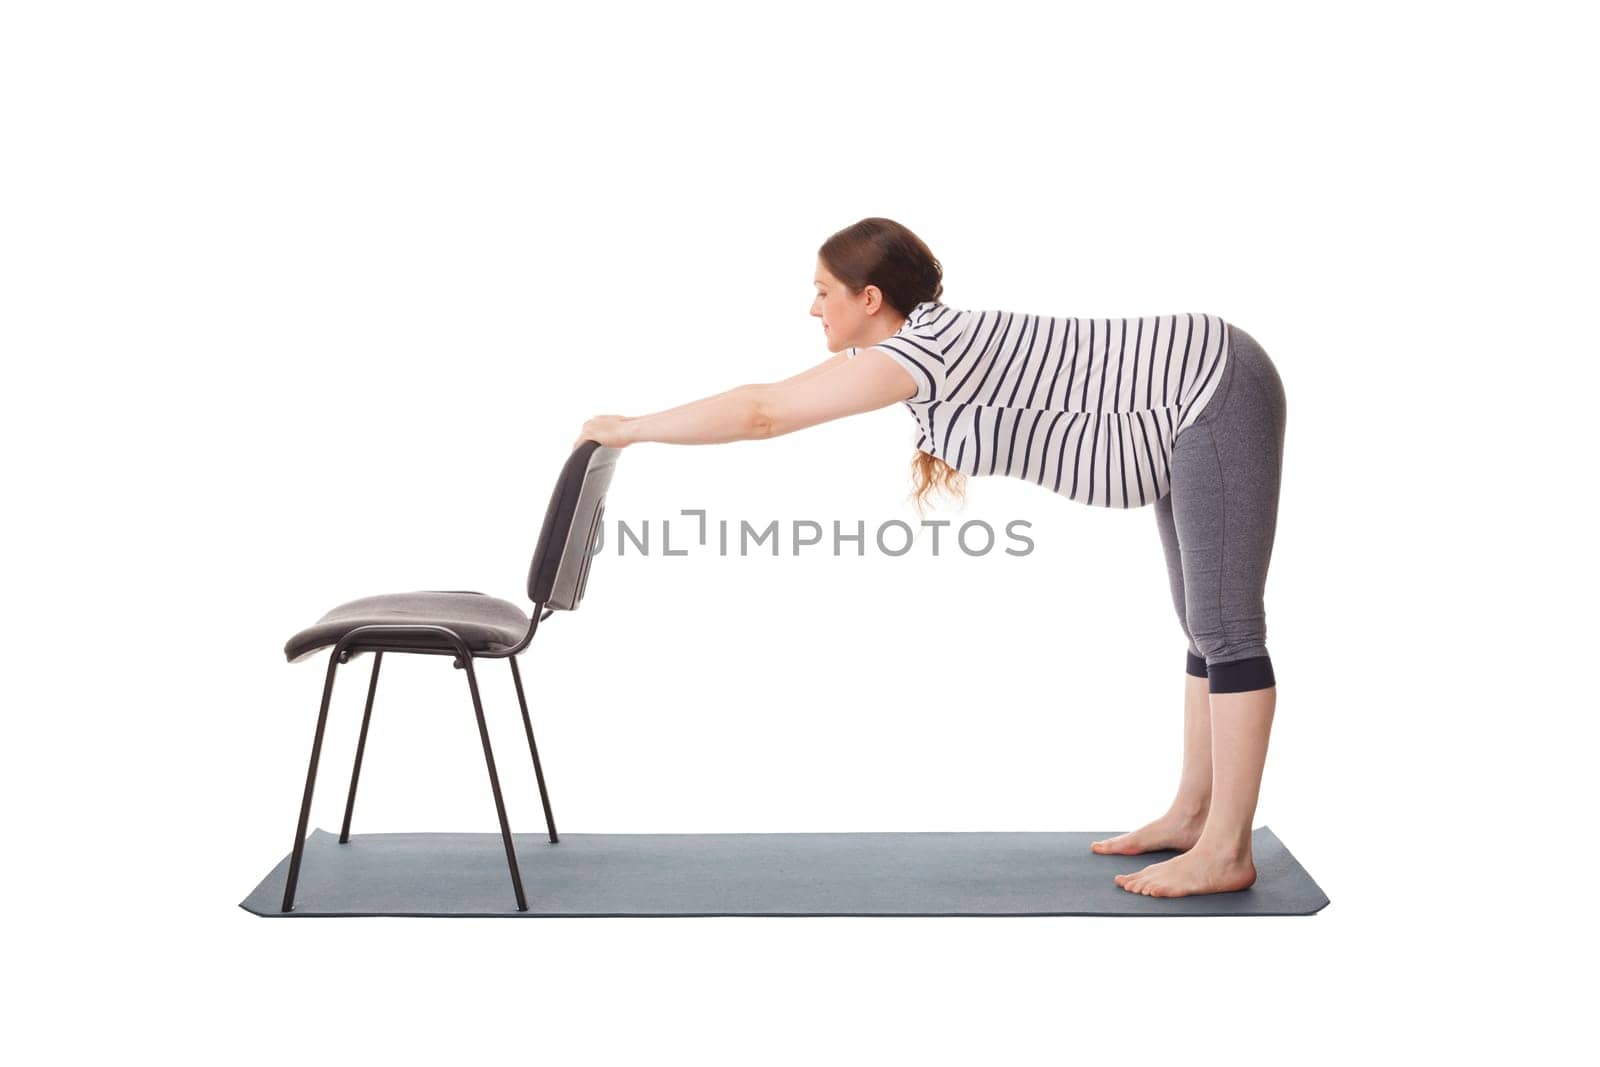 Pregnancy yoga exercise - pregnant woman doing yoga asana Uttanasana Standing Forward Fold Pose with hands on chair easy variation isolated on white background